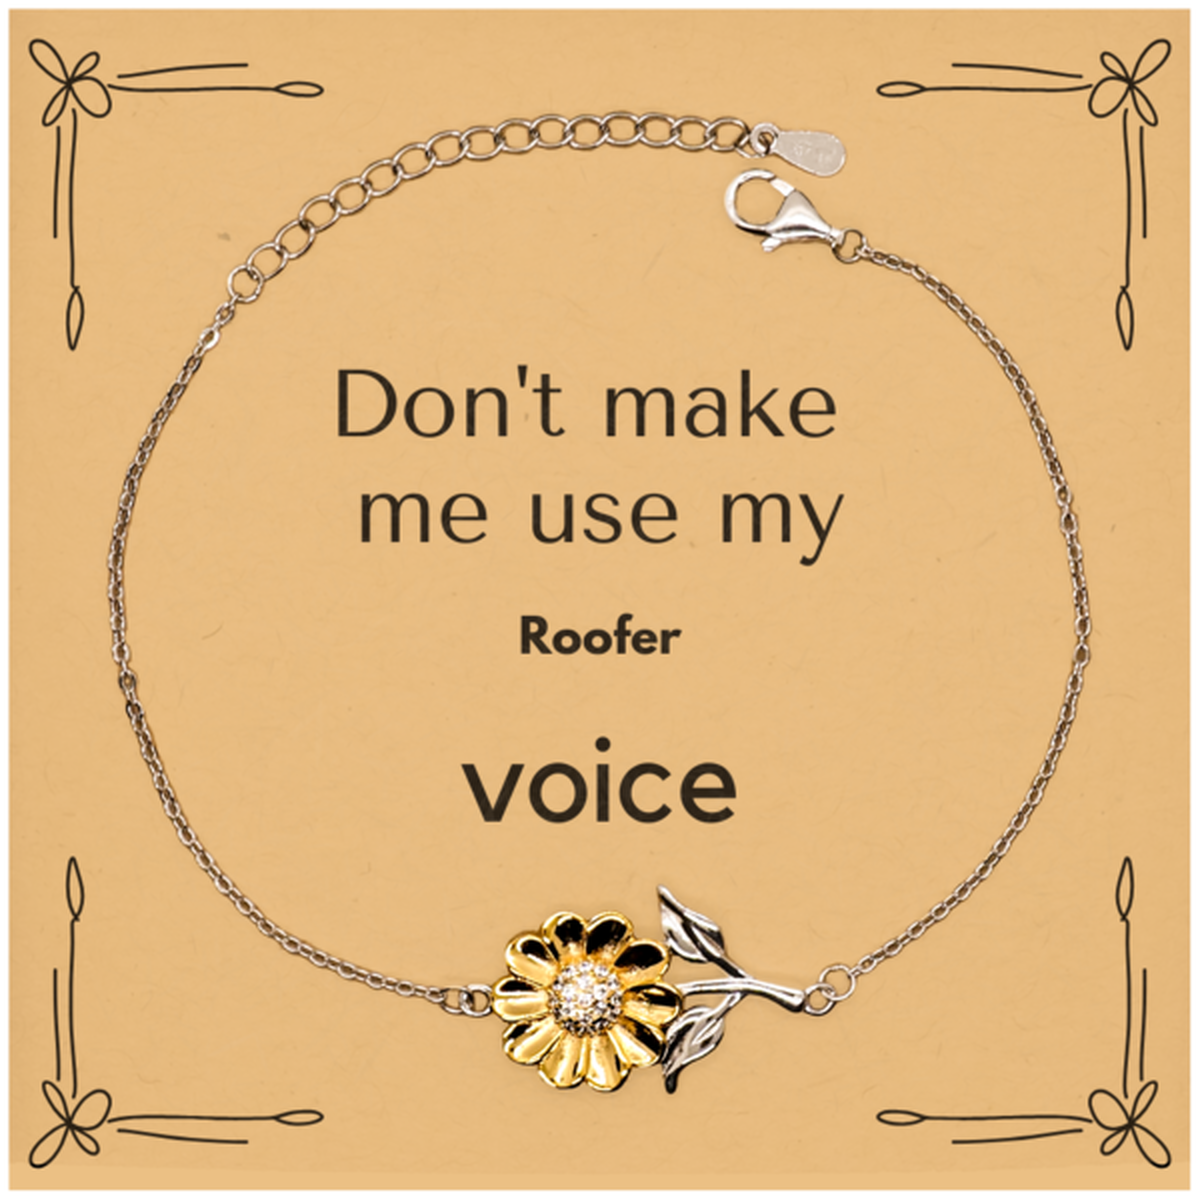 Don't make me use my Roofer voice, Sarcasm Roofer Card Gifts, Christmas Roofer Sunflower Bracelet Birthday Unique Gifts For Roofer Coworkers, Men, Women, Colleague, Friends